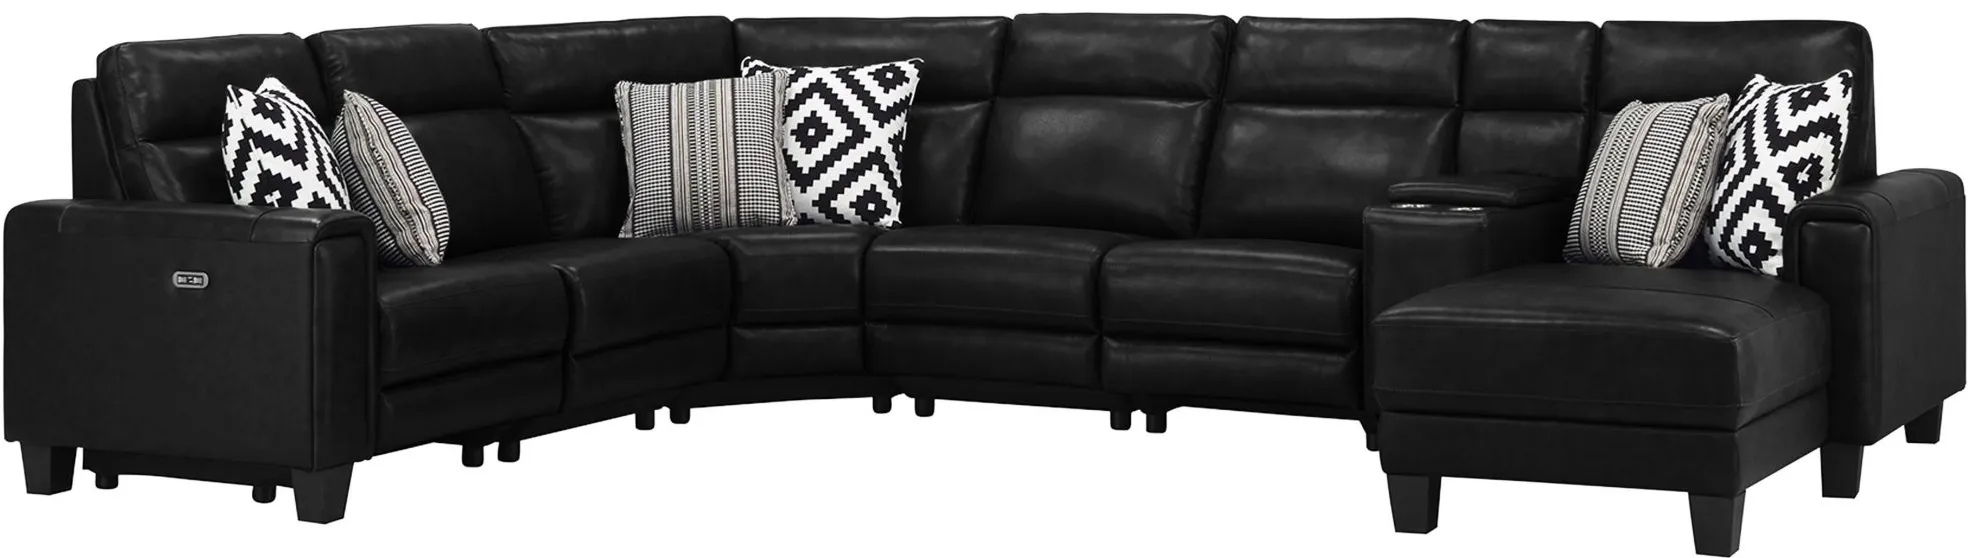 Ace 7-pc. Power Sectional in Black by Bellanest